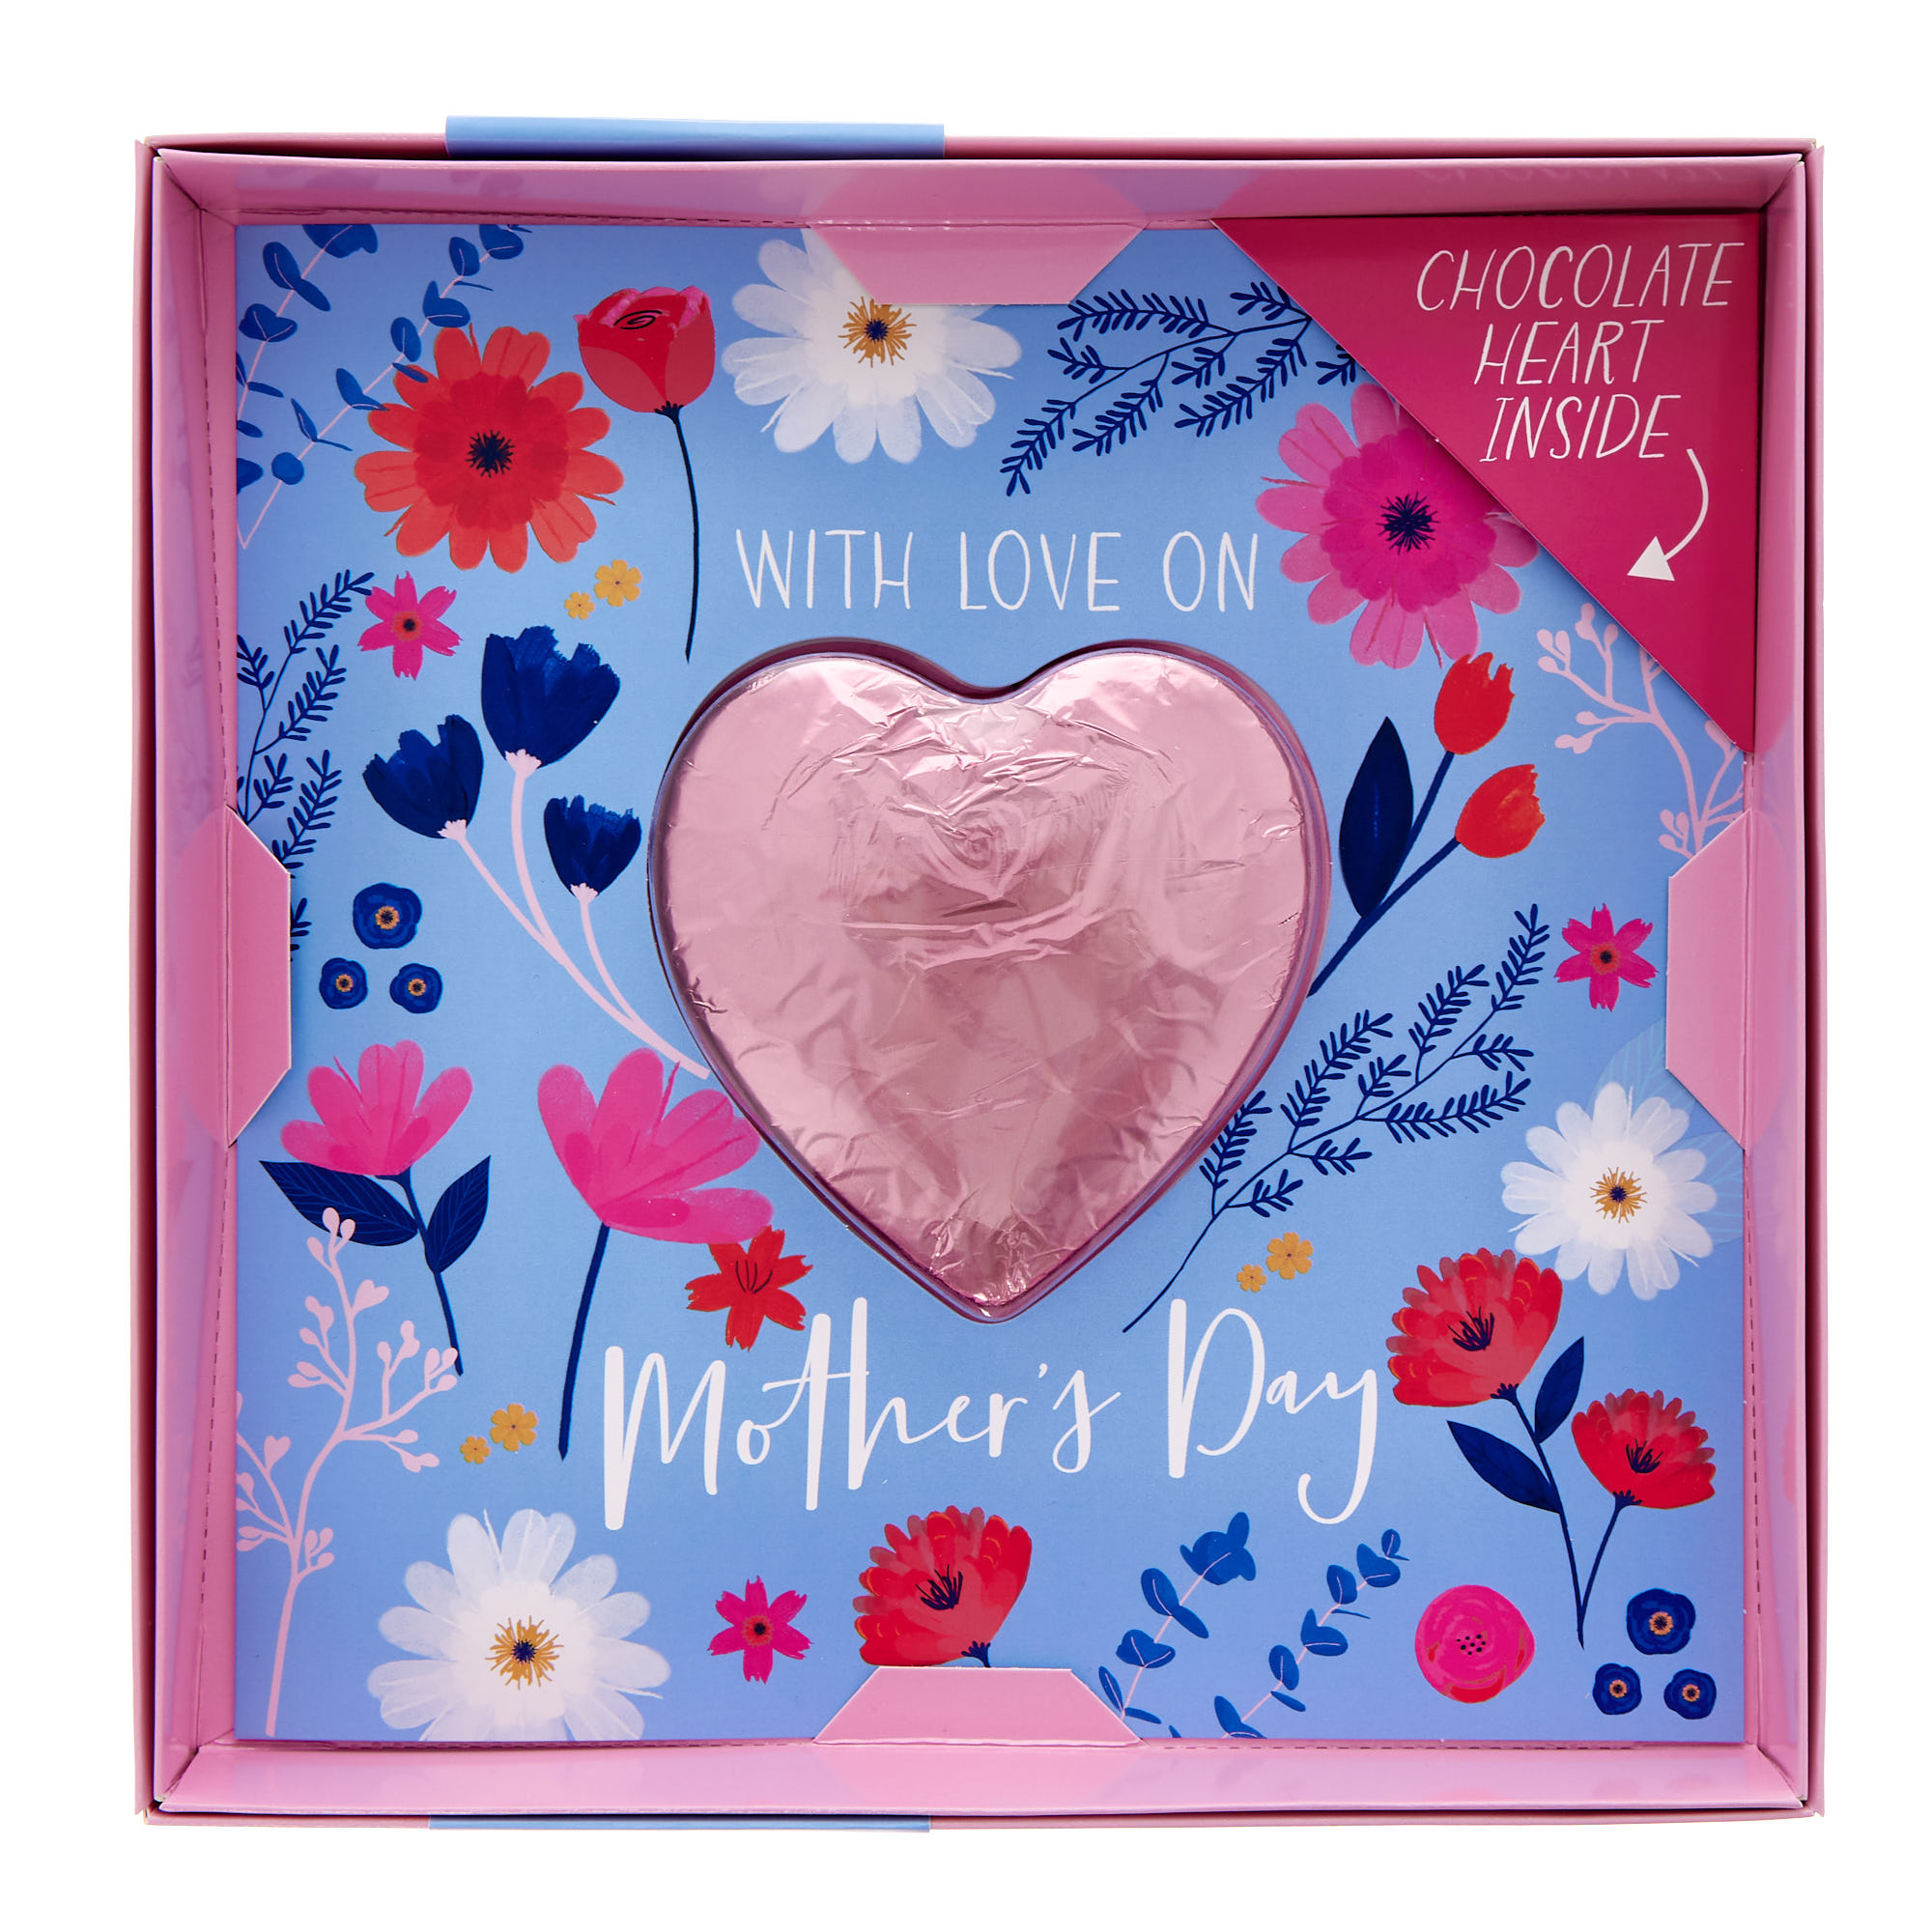 With Love Mother's Day Card with Milk Chocolate Heart